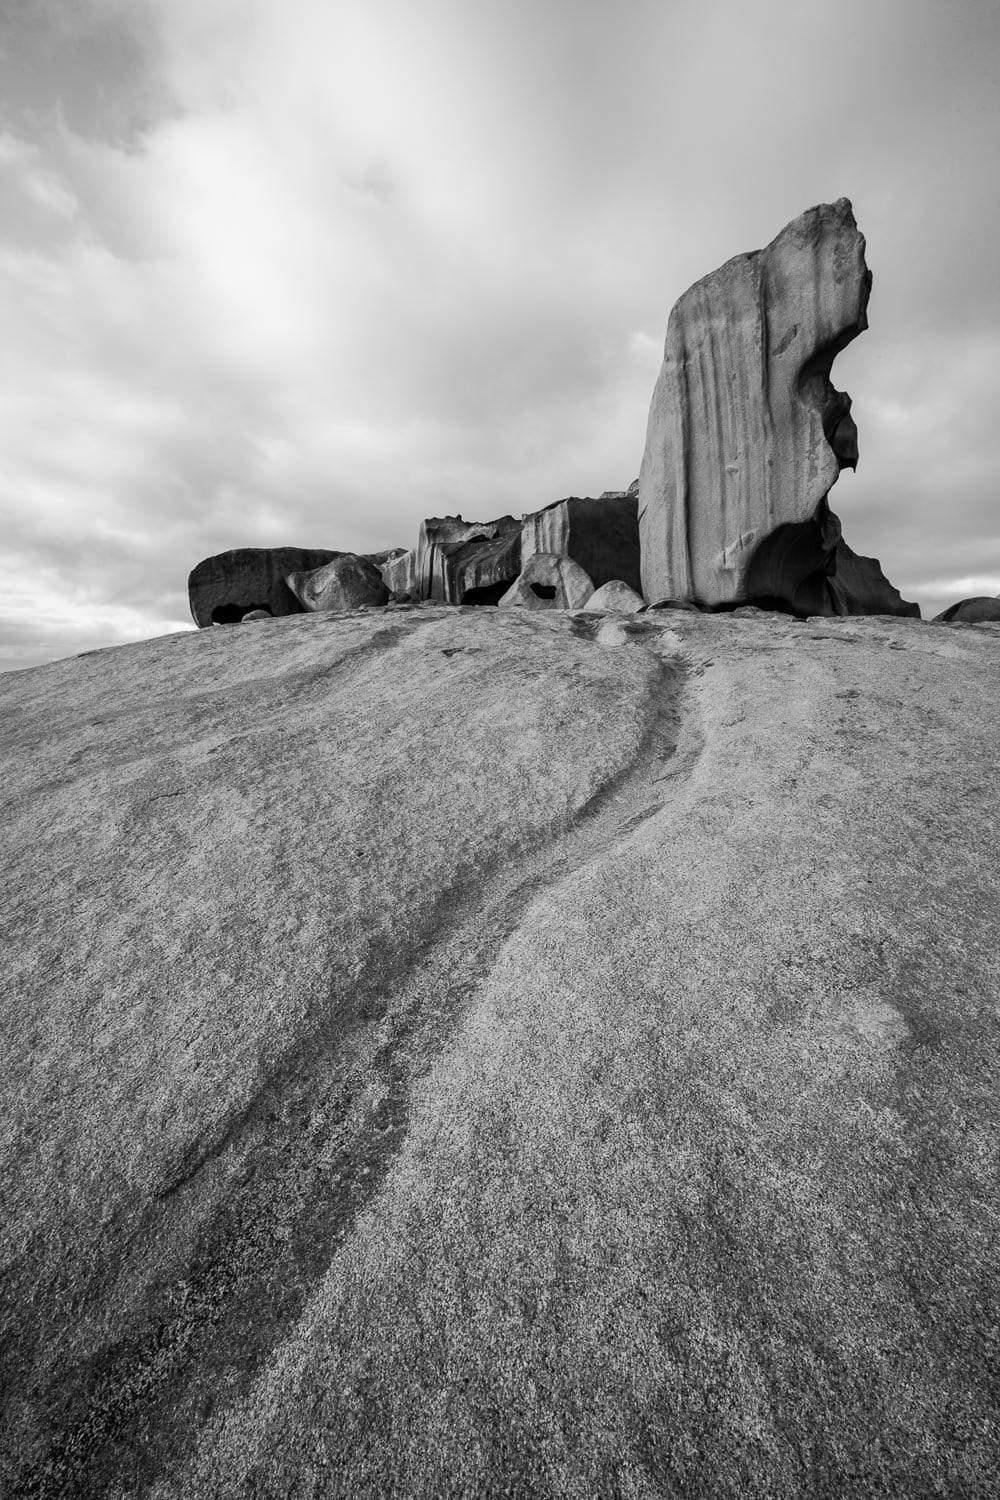 Black and white view of a land following a large standing stone, Remarkable Rocks #24 - Kangaroo Island SA